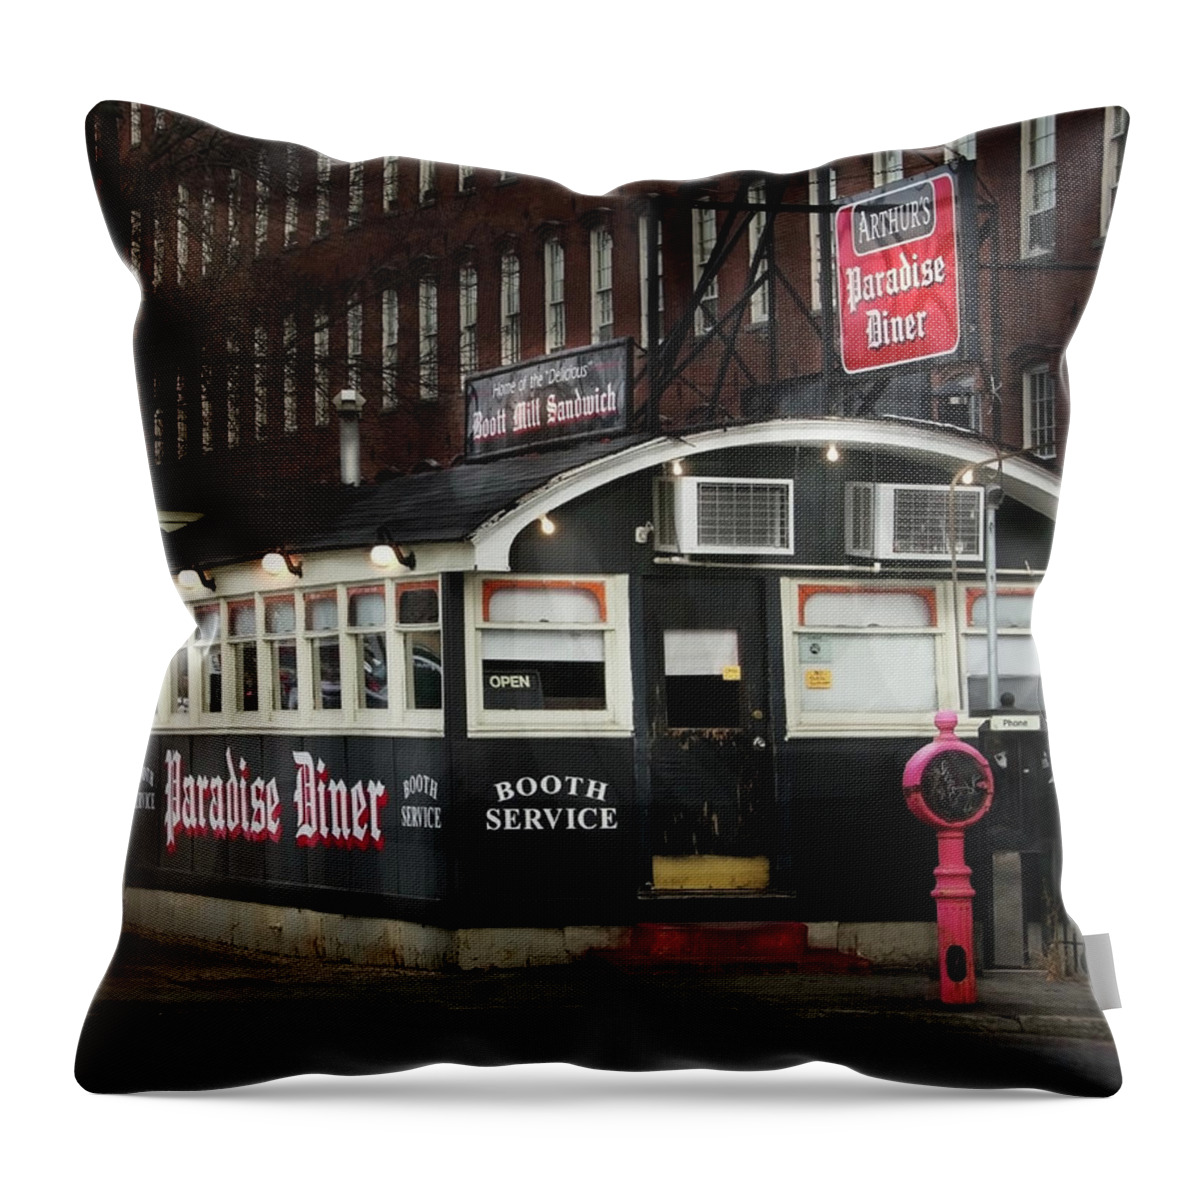 Diners Throw Pillow featuring the photograph Arthur's Paradise Diner by Betty Denise